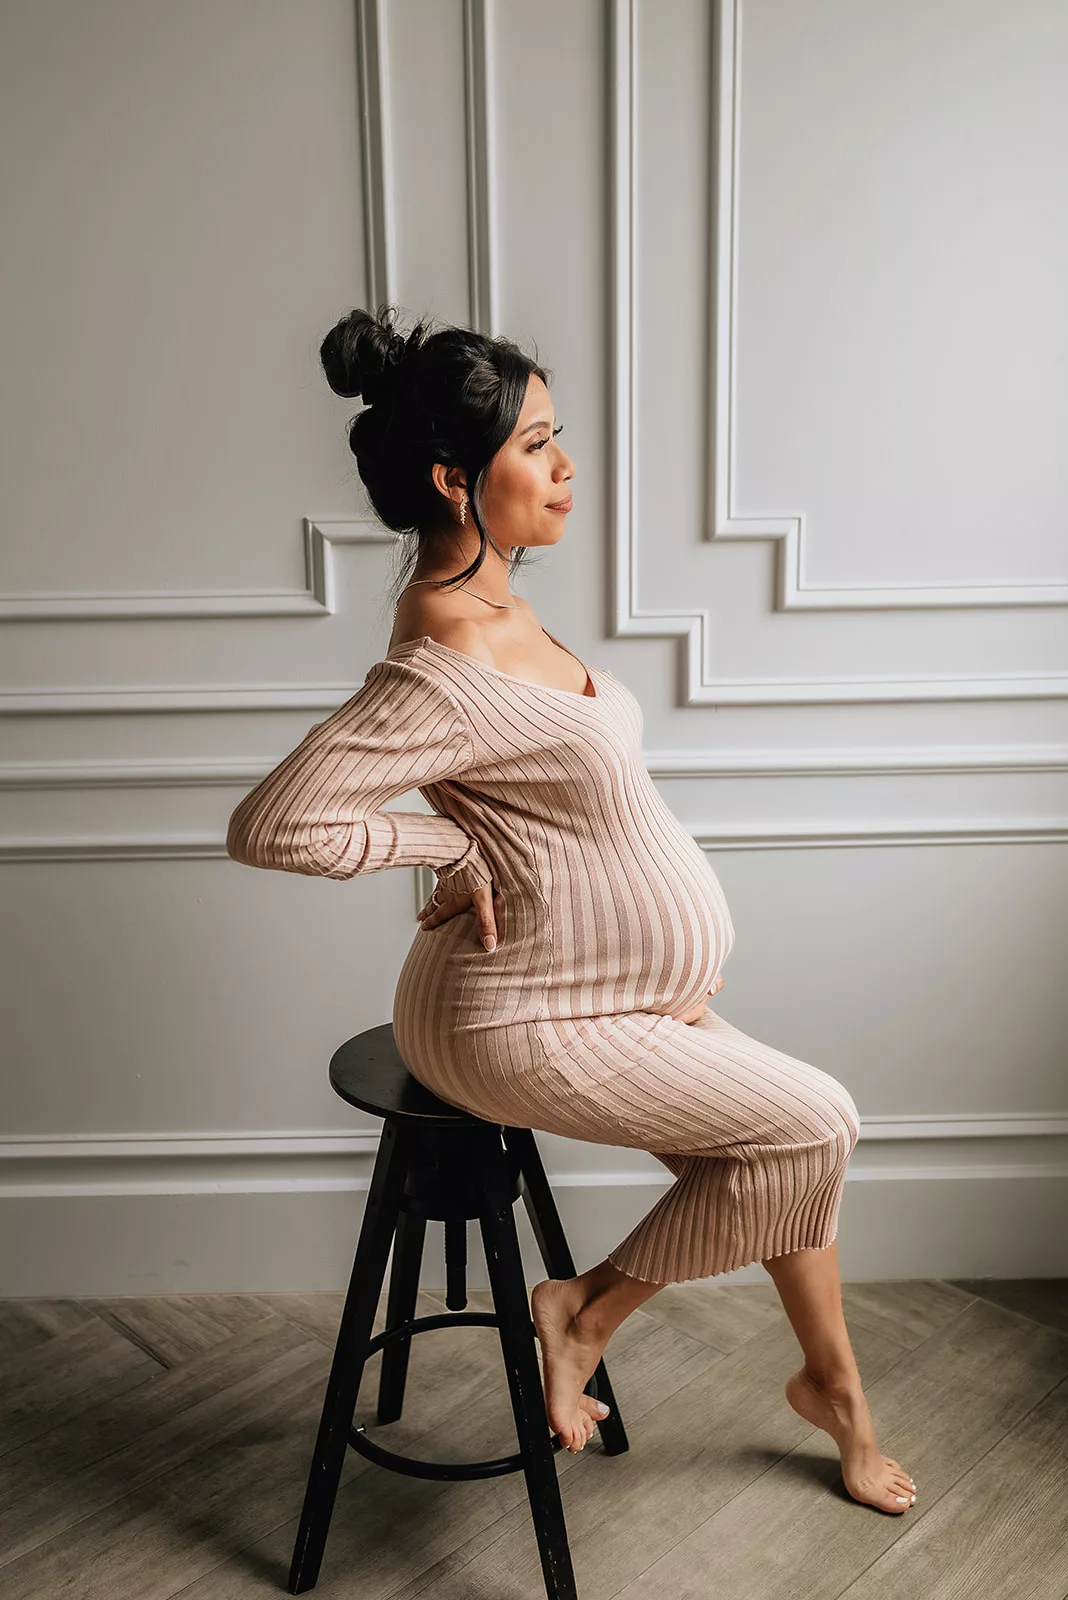 A mother to be in a beige maternity dress sits on a stool in a studio smiling out a window after getting her 3D Ultrasound In Houston